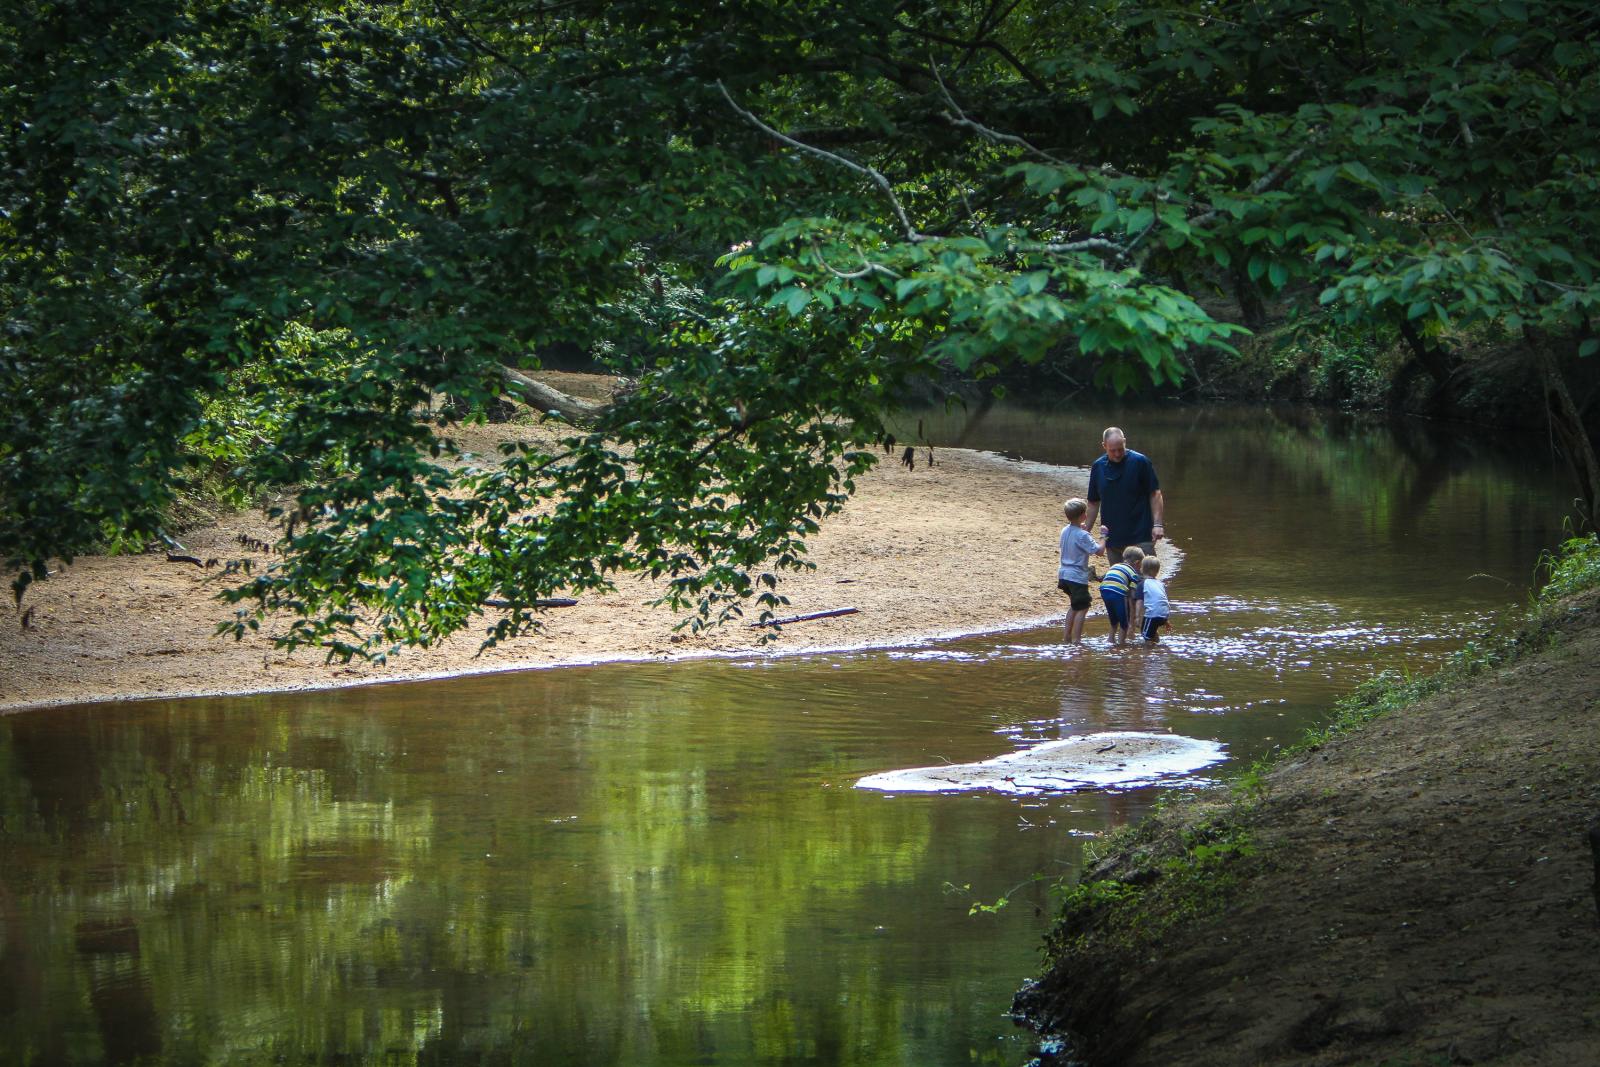 A man and three children play in a gentle creek.